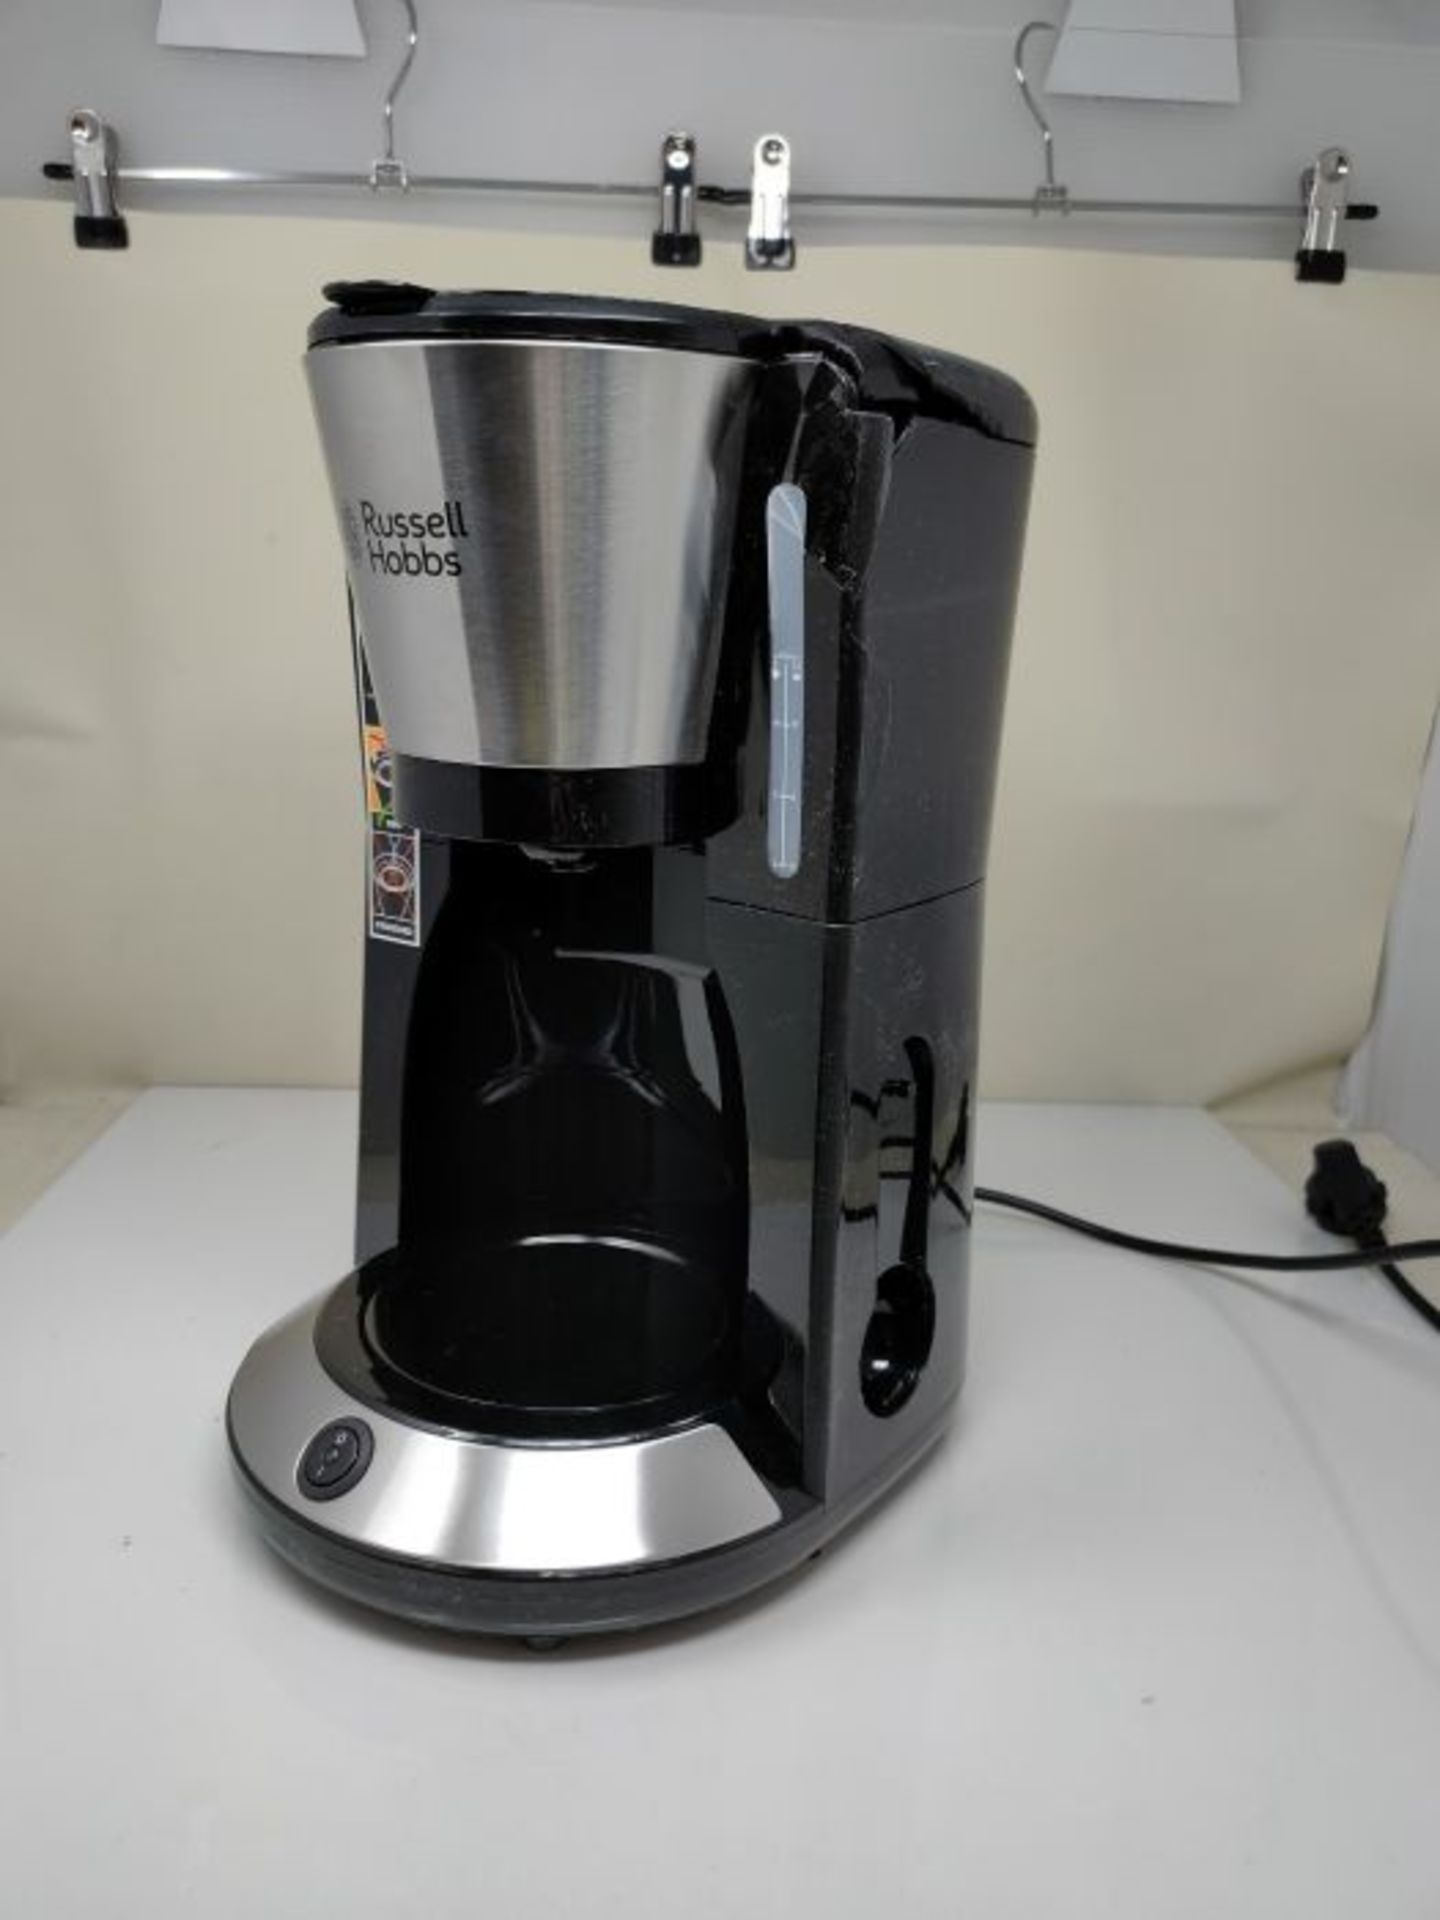 [CRACKED] Russell Hobbs 24020-56 Adventure Filter Koffiezetapparaat - thermos kan - Image 3 of 3